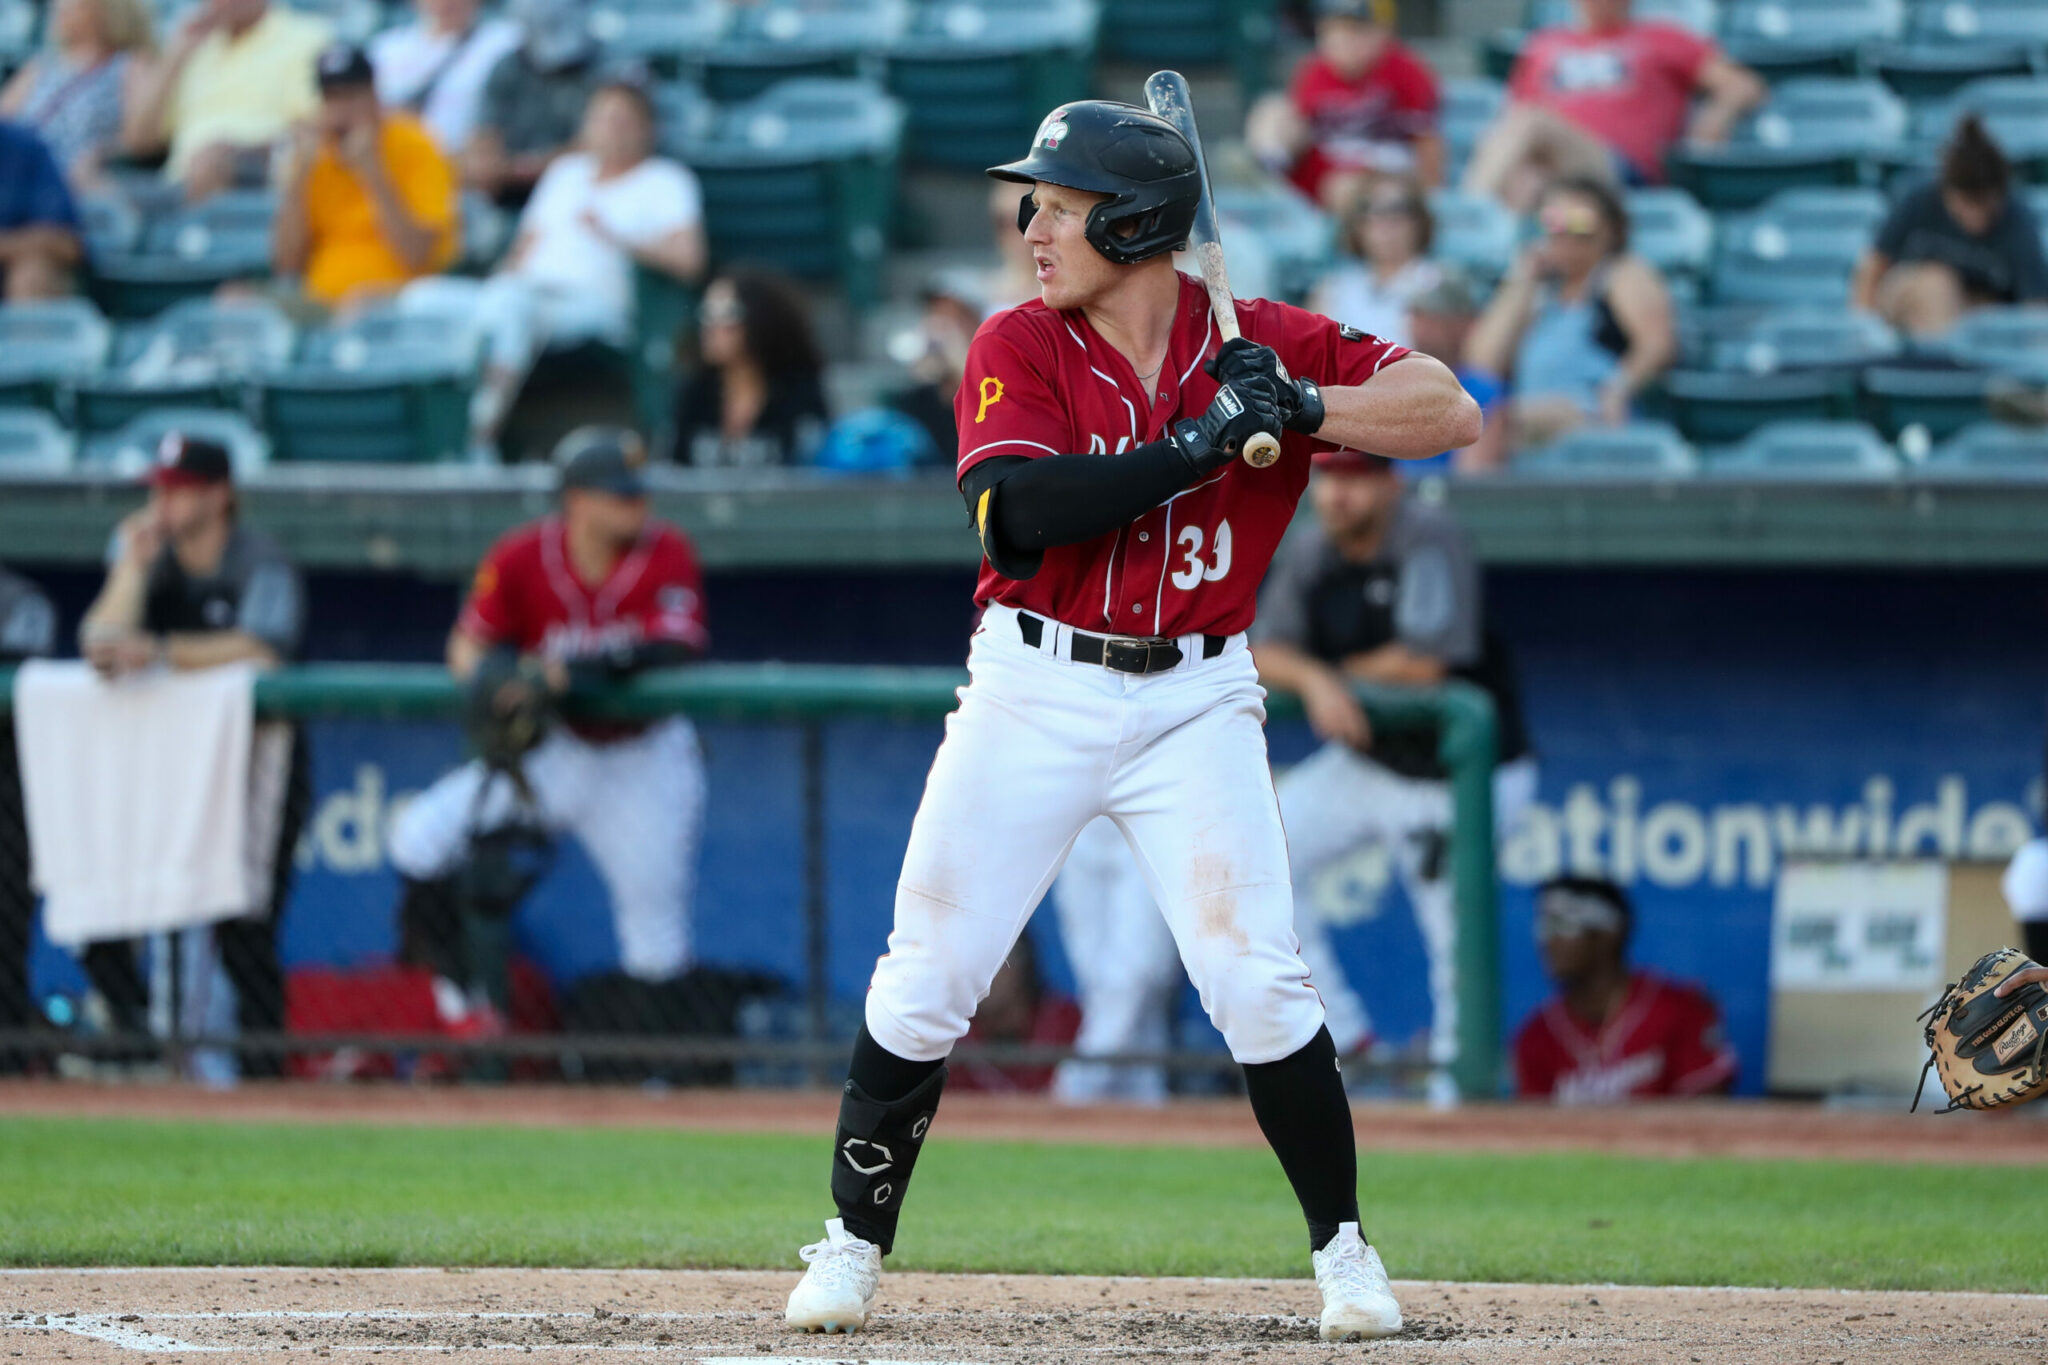 Pirates DVR: Kevin Padlo Debut, Jared Triolo Clutch Hit, Aaron Shackelford Home Run